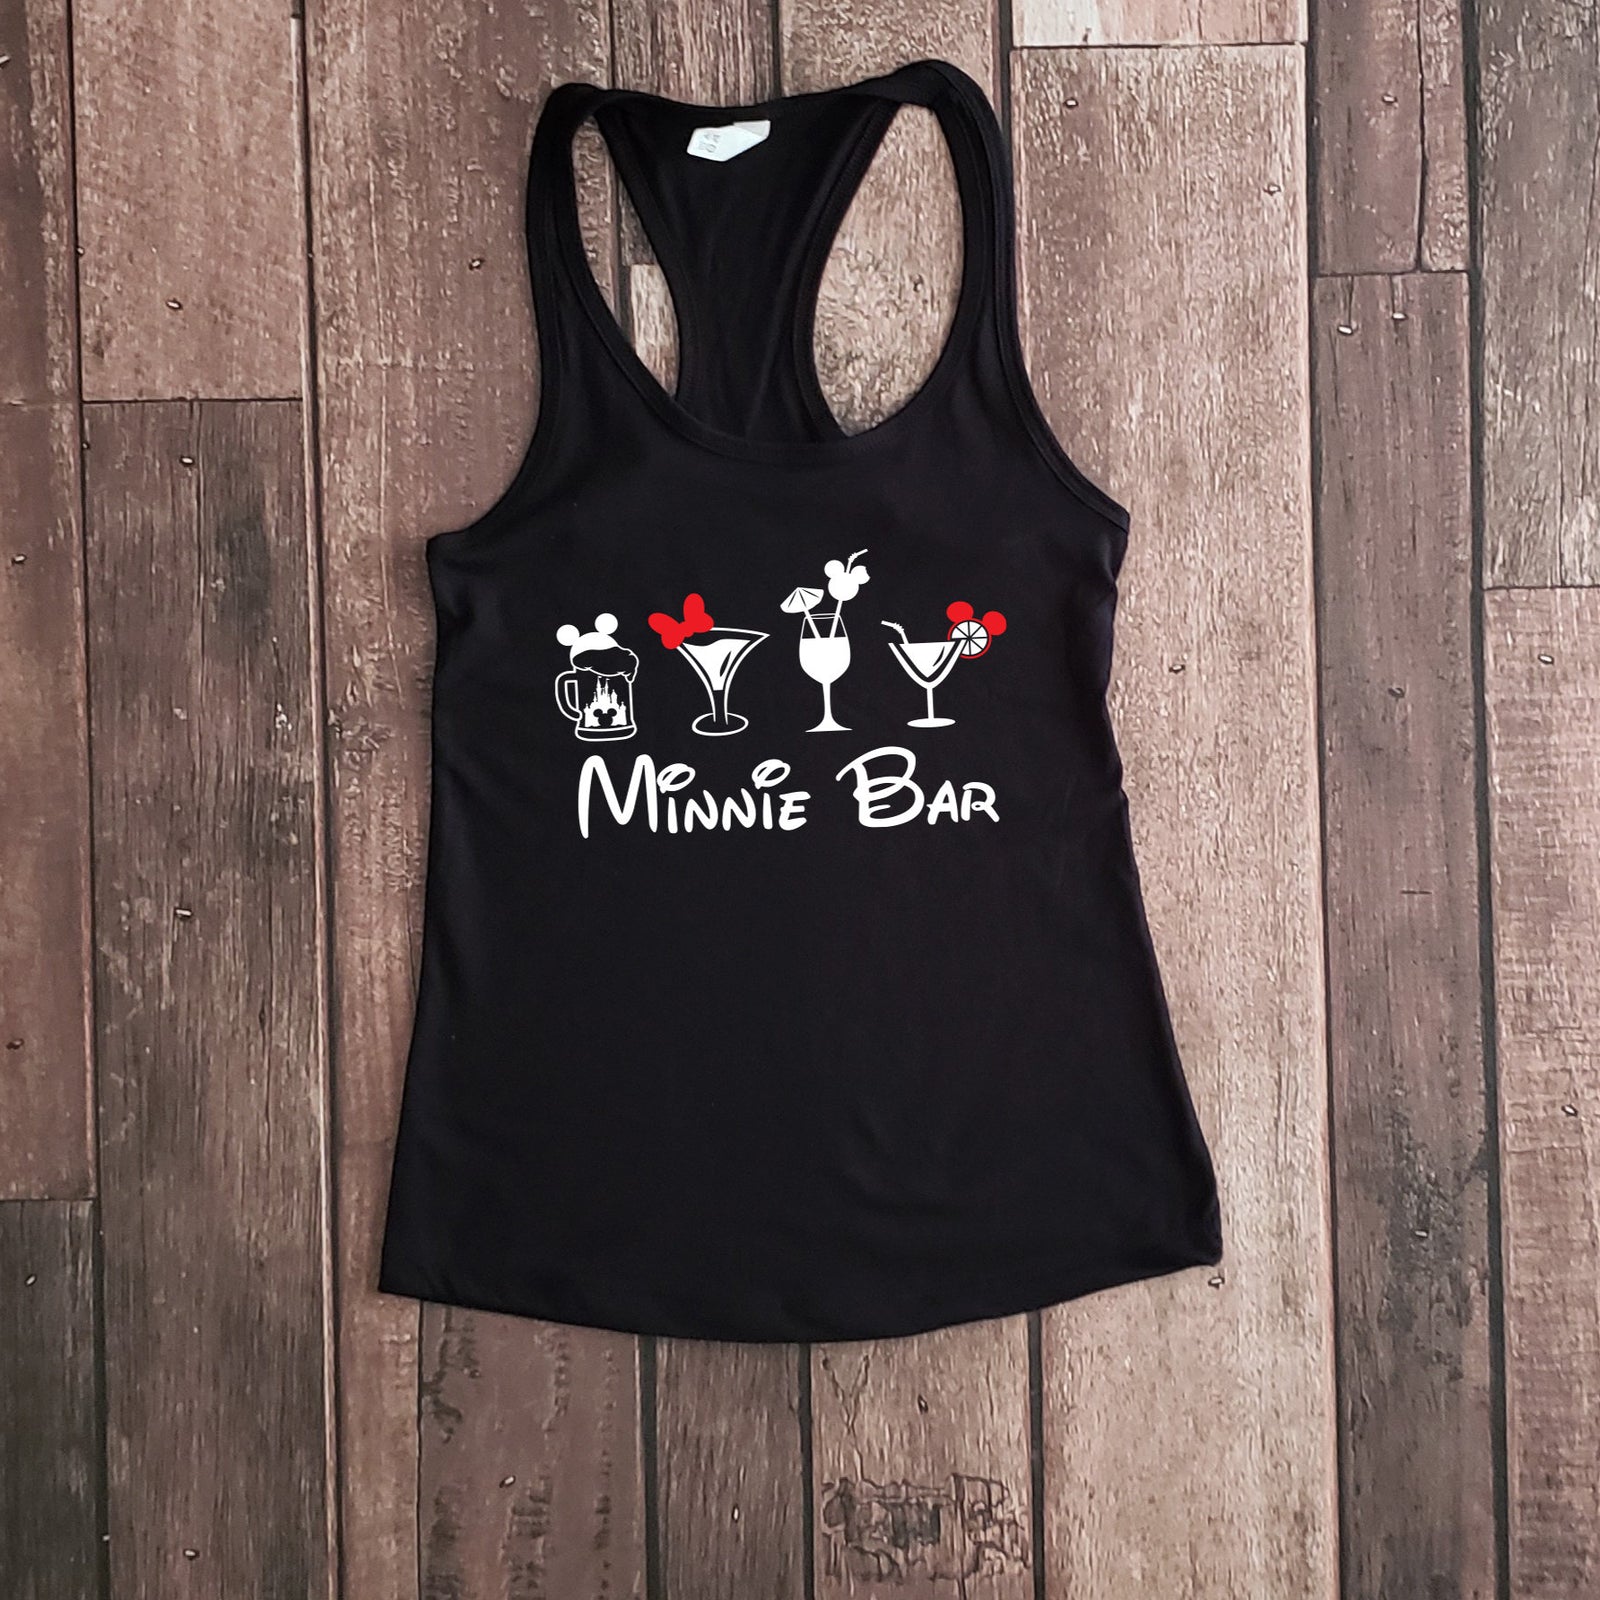 Minnie Mouse Ladies Fit Racer Back Tank Top- Minnie Bar - Drinks - Epcot Food and Wine